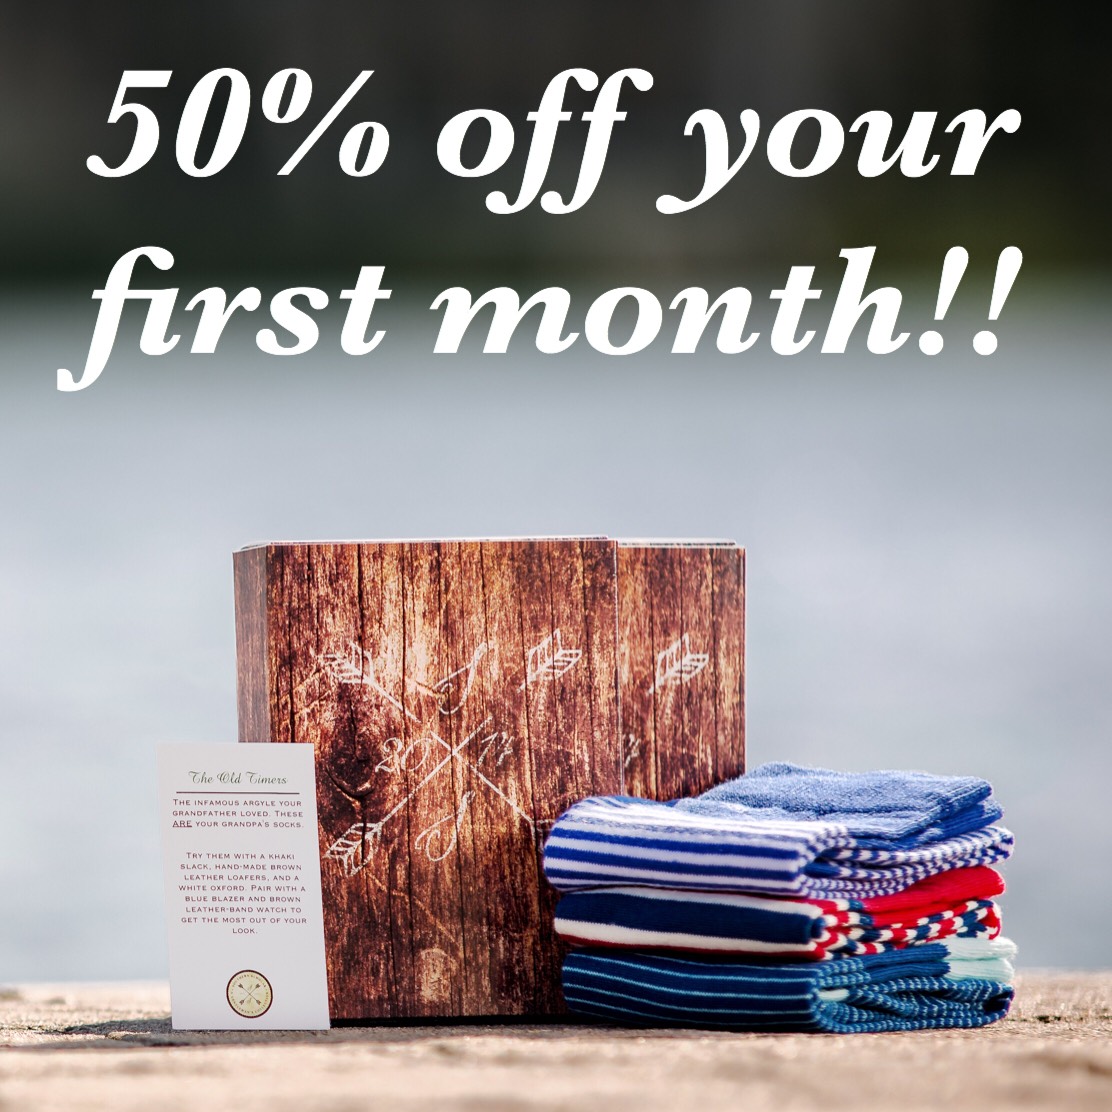 Southern Scholar Cyber Monday Deal – 50% Off Your First Month!